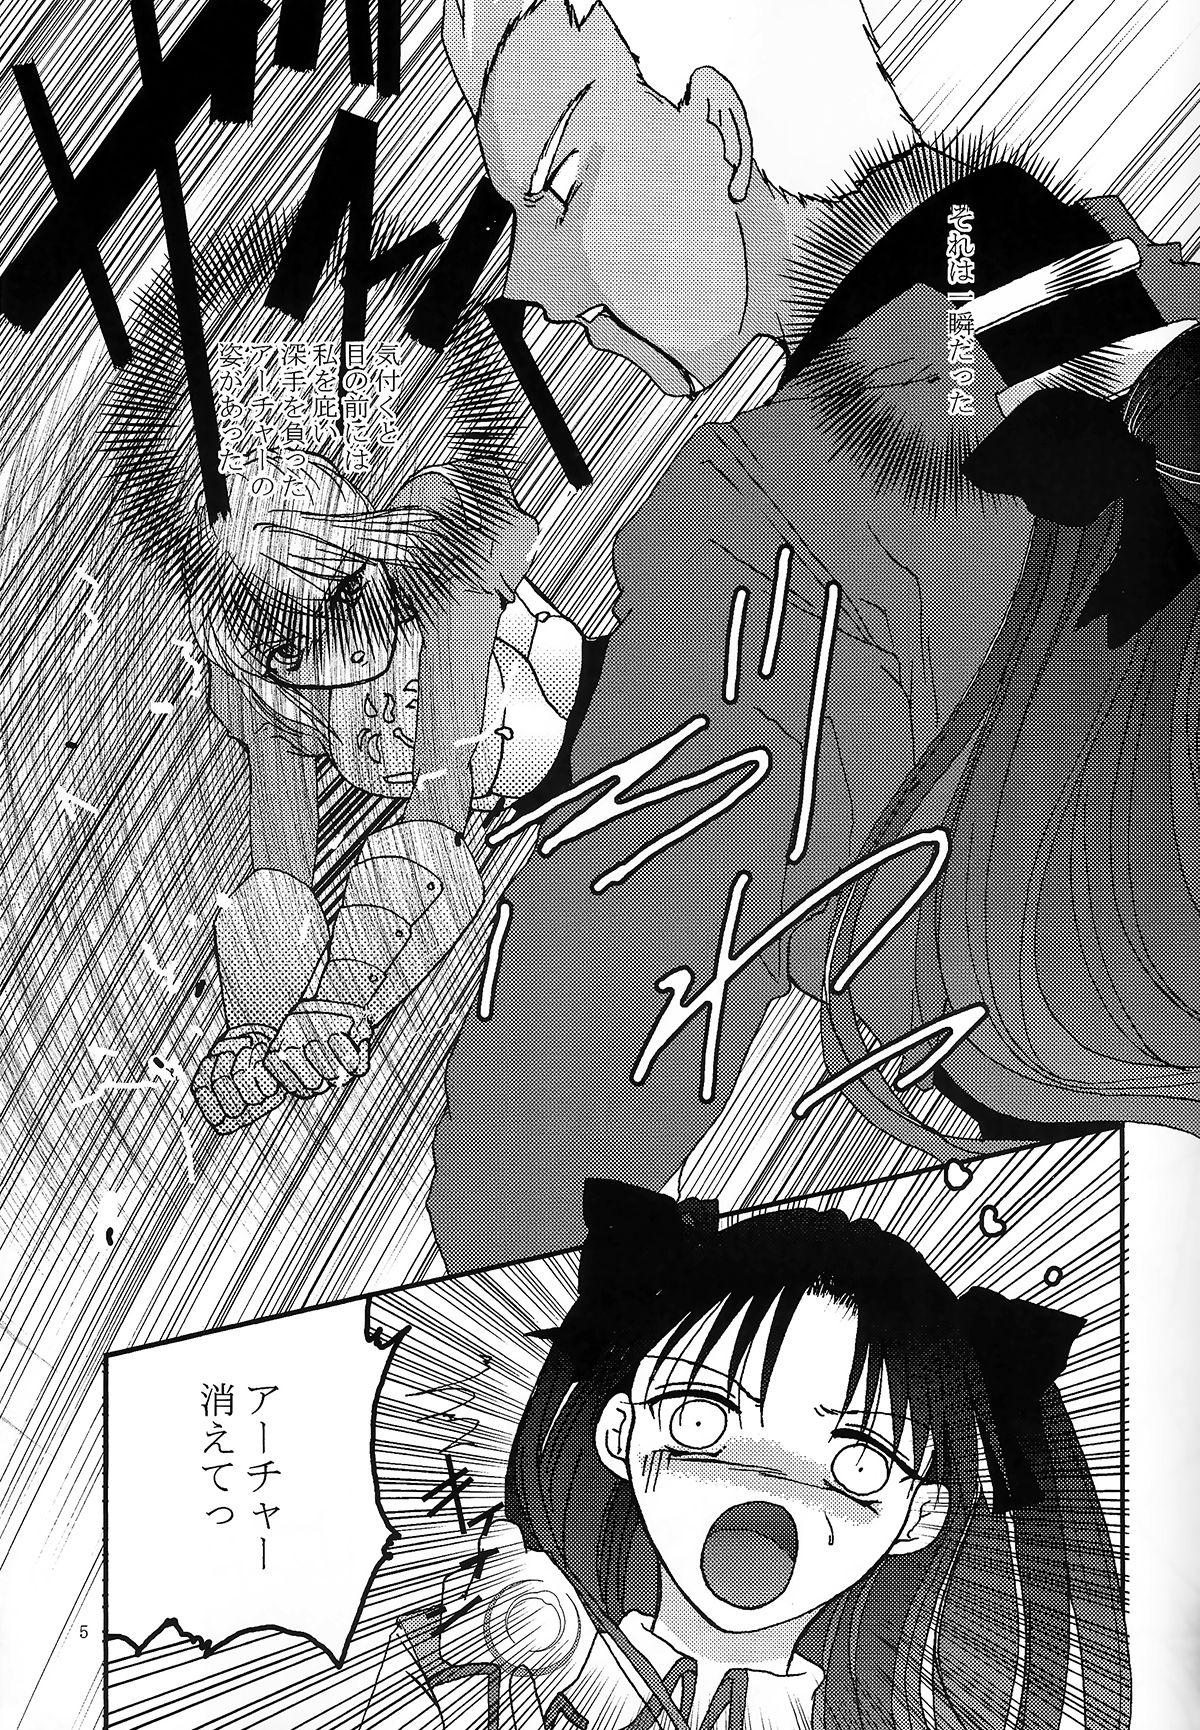 Oil Question-7 - Fate stay night Women Sucking Dicks - Page 3